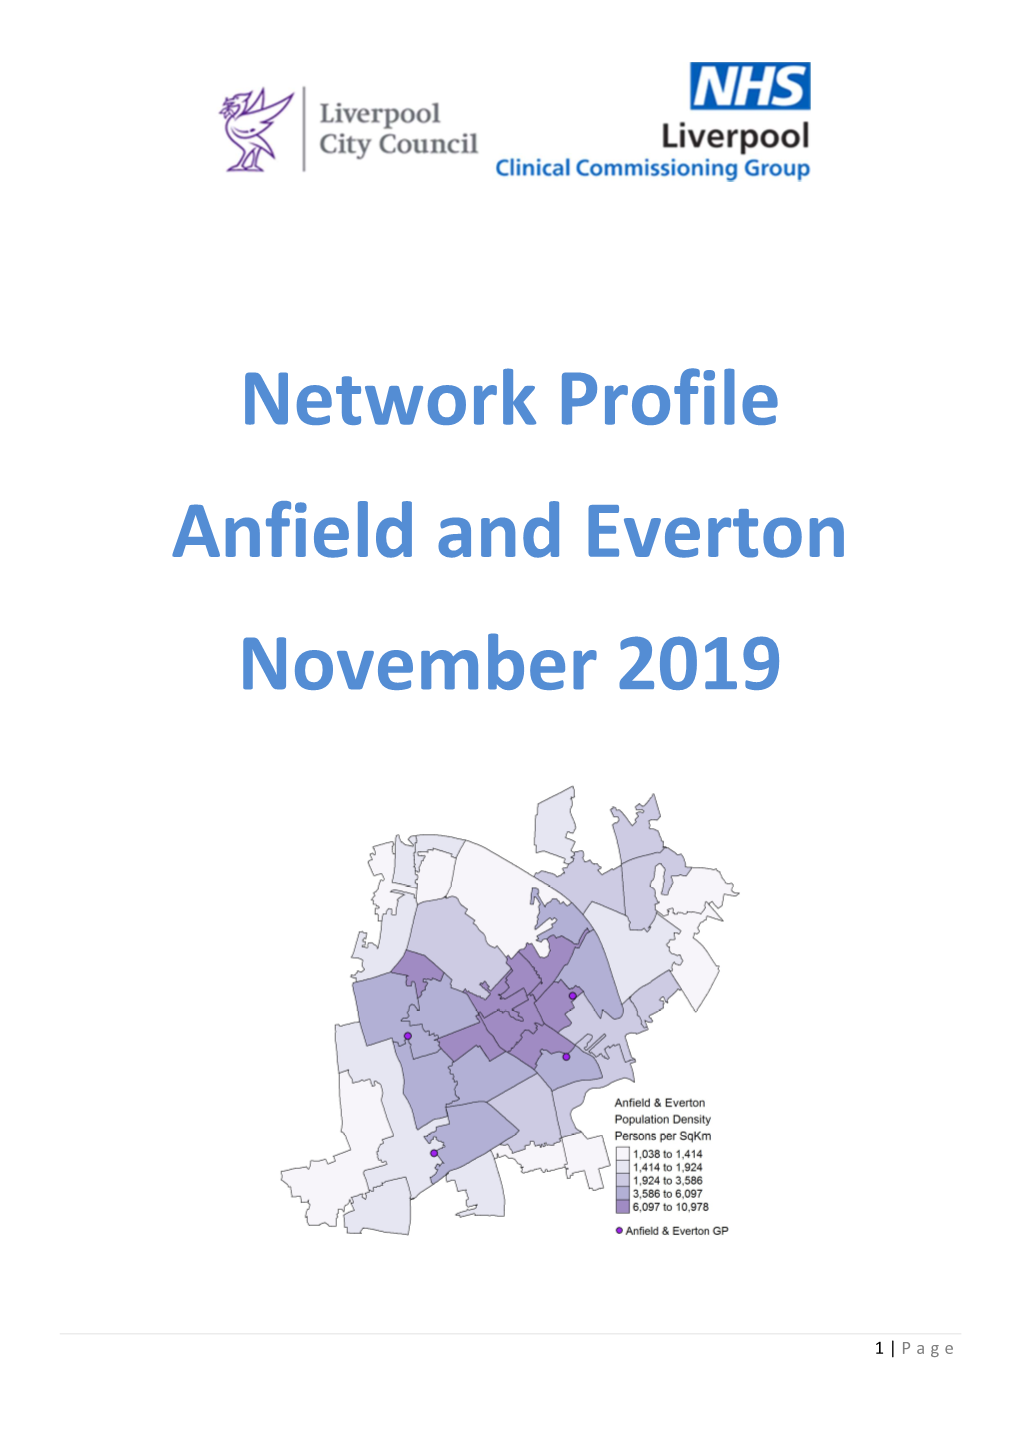 Anfield and Everton November 2019